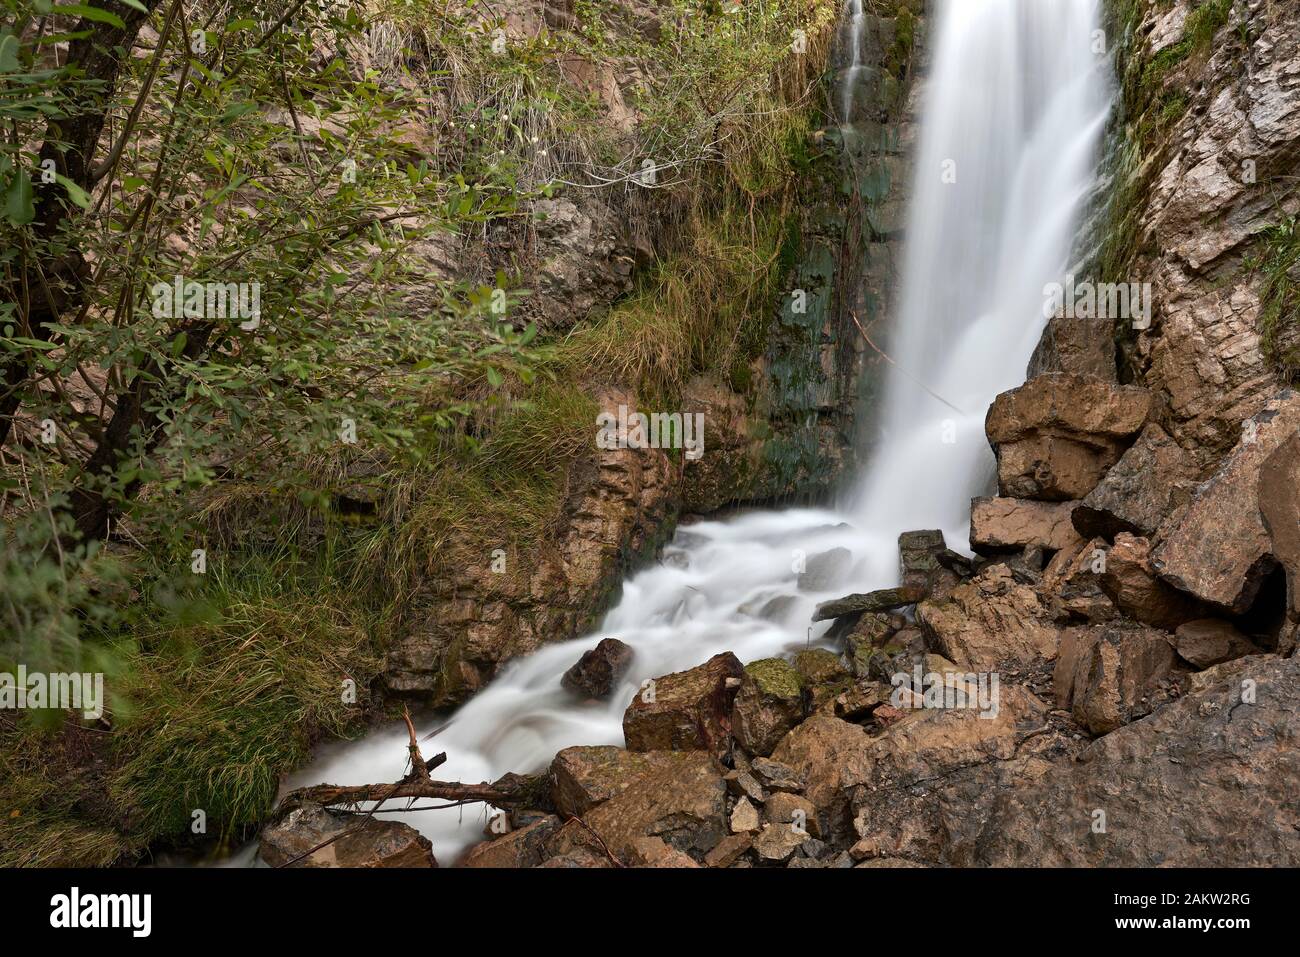 Waterfall on Arcos river. Stock Photo